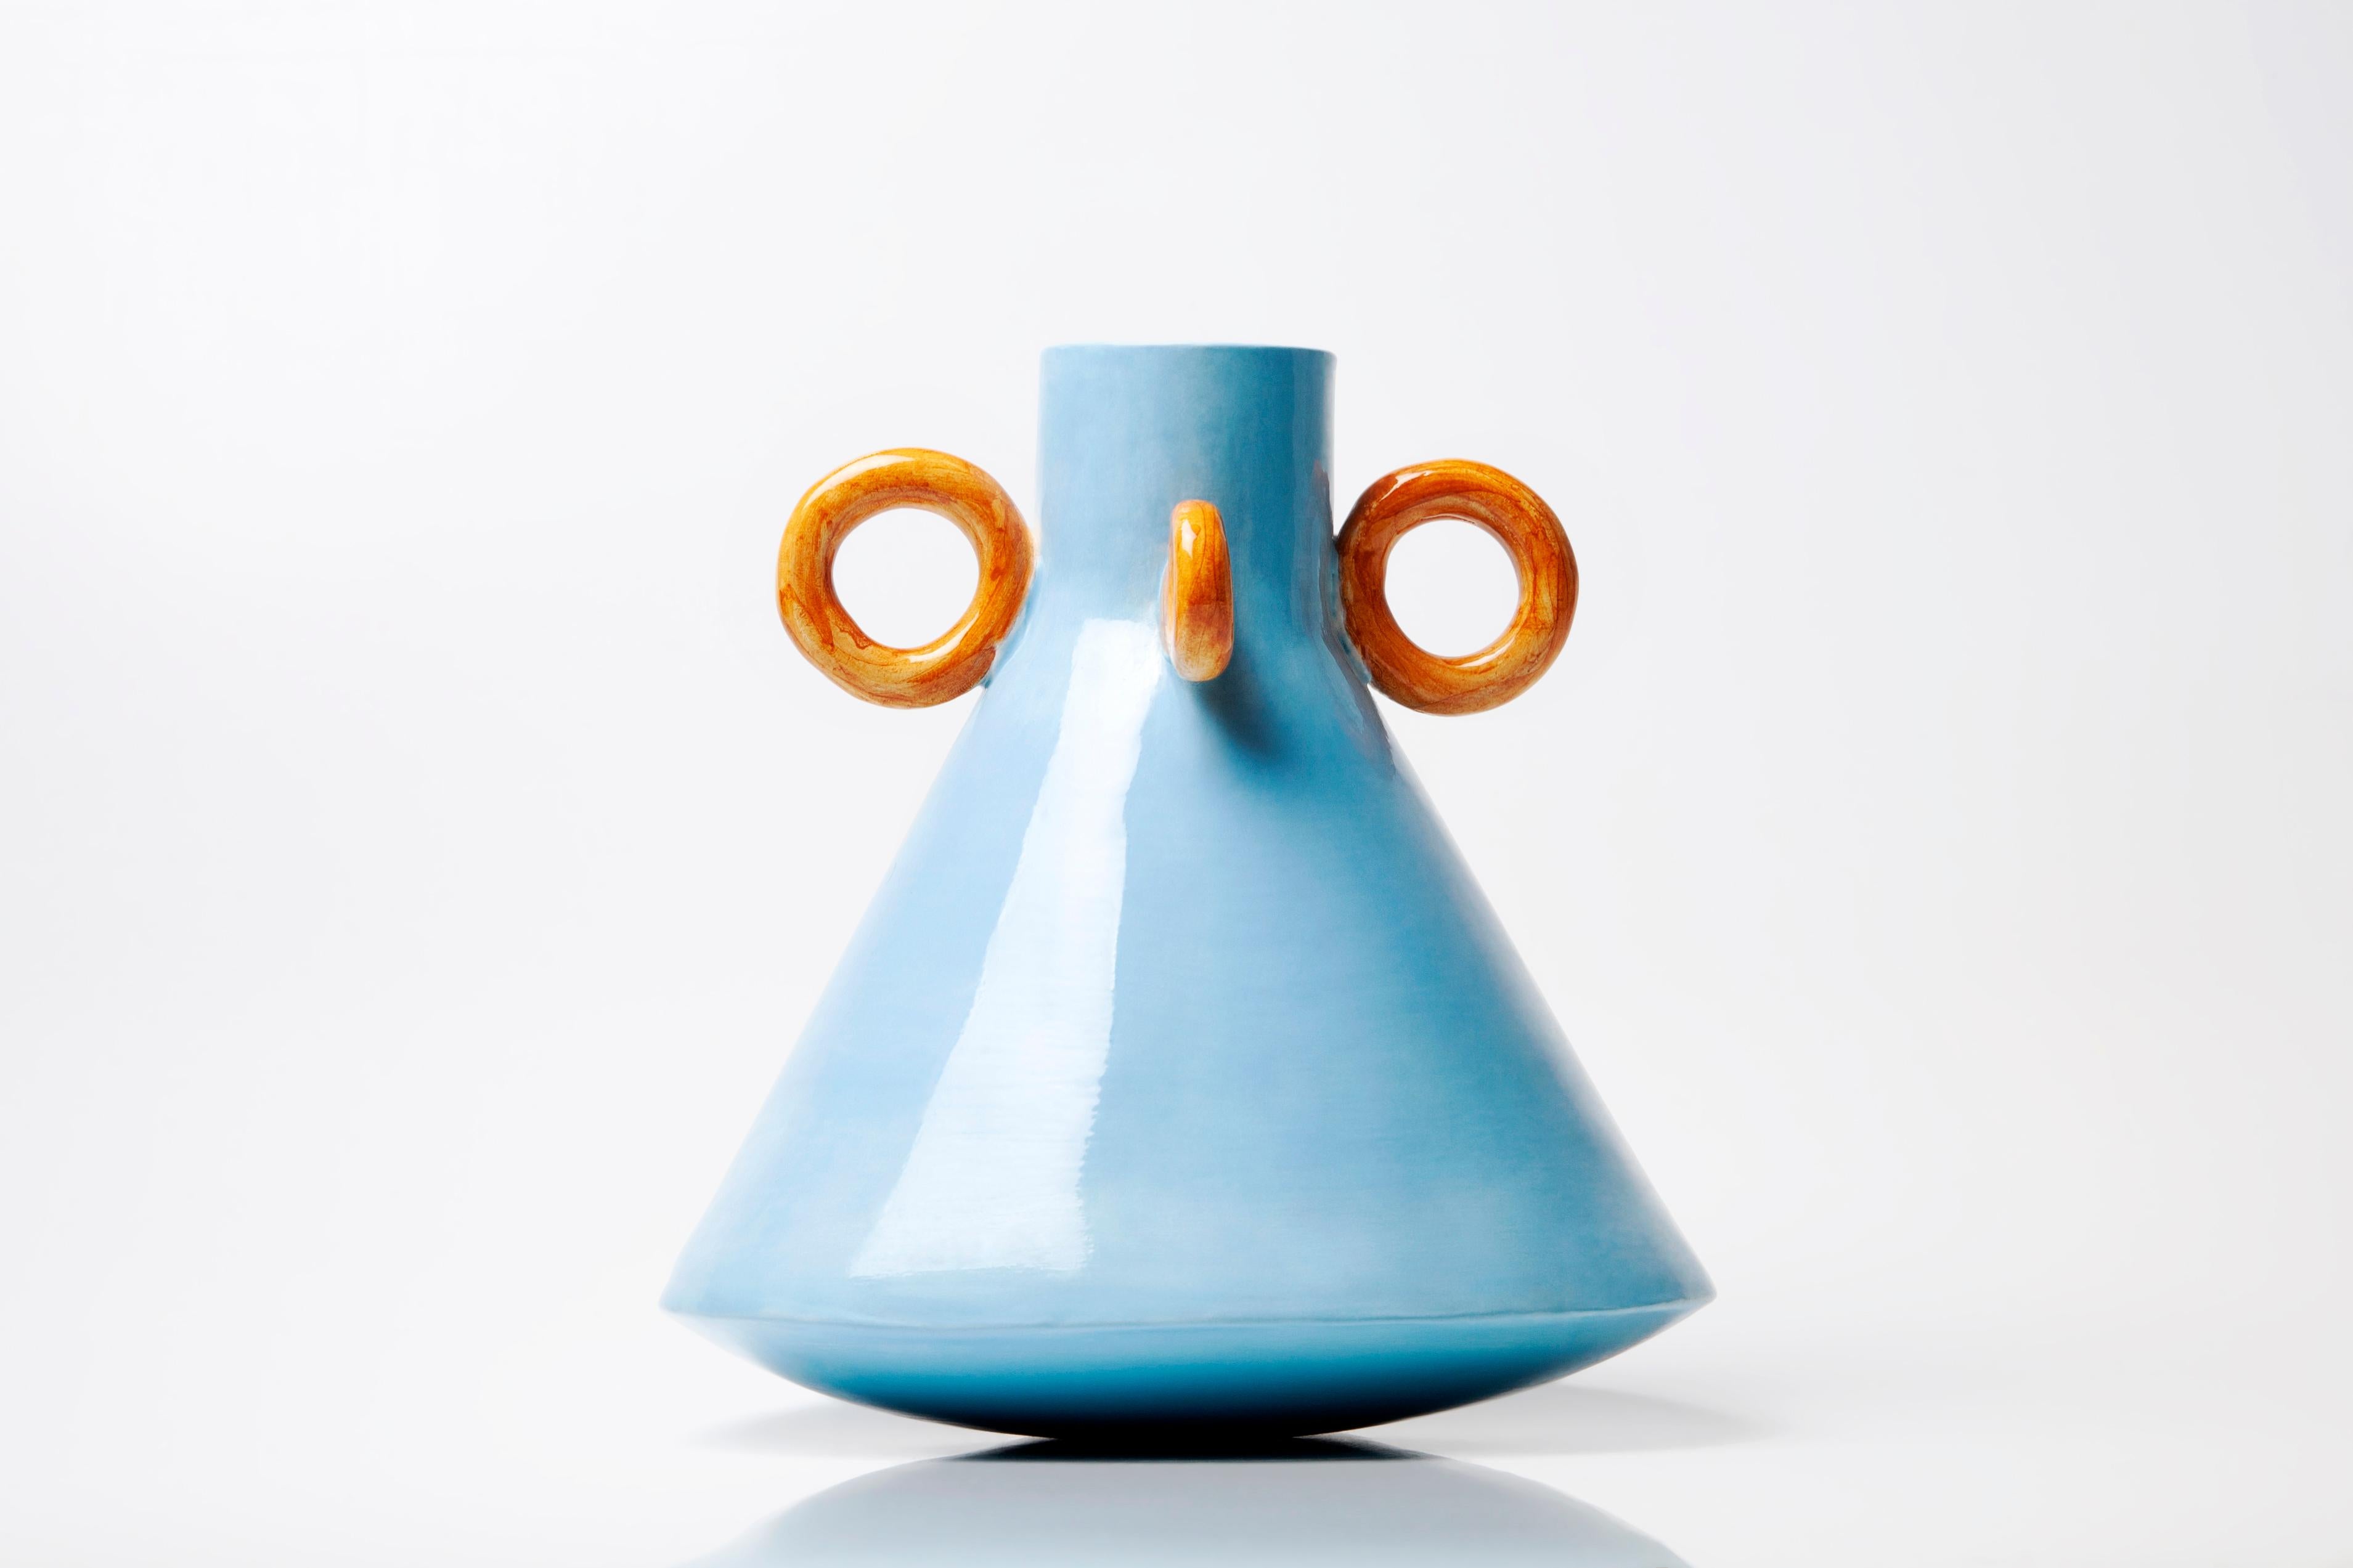 Ramina vase by Arianna De Luca
Dimensions: height 20 x diameter 20 cm 
Materials: ceramic 

Ramina is part of the Folcloristica series. A collection inspired by the mood and lifestyle of the Southern Italian villages. The vase revisits shapes